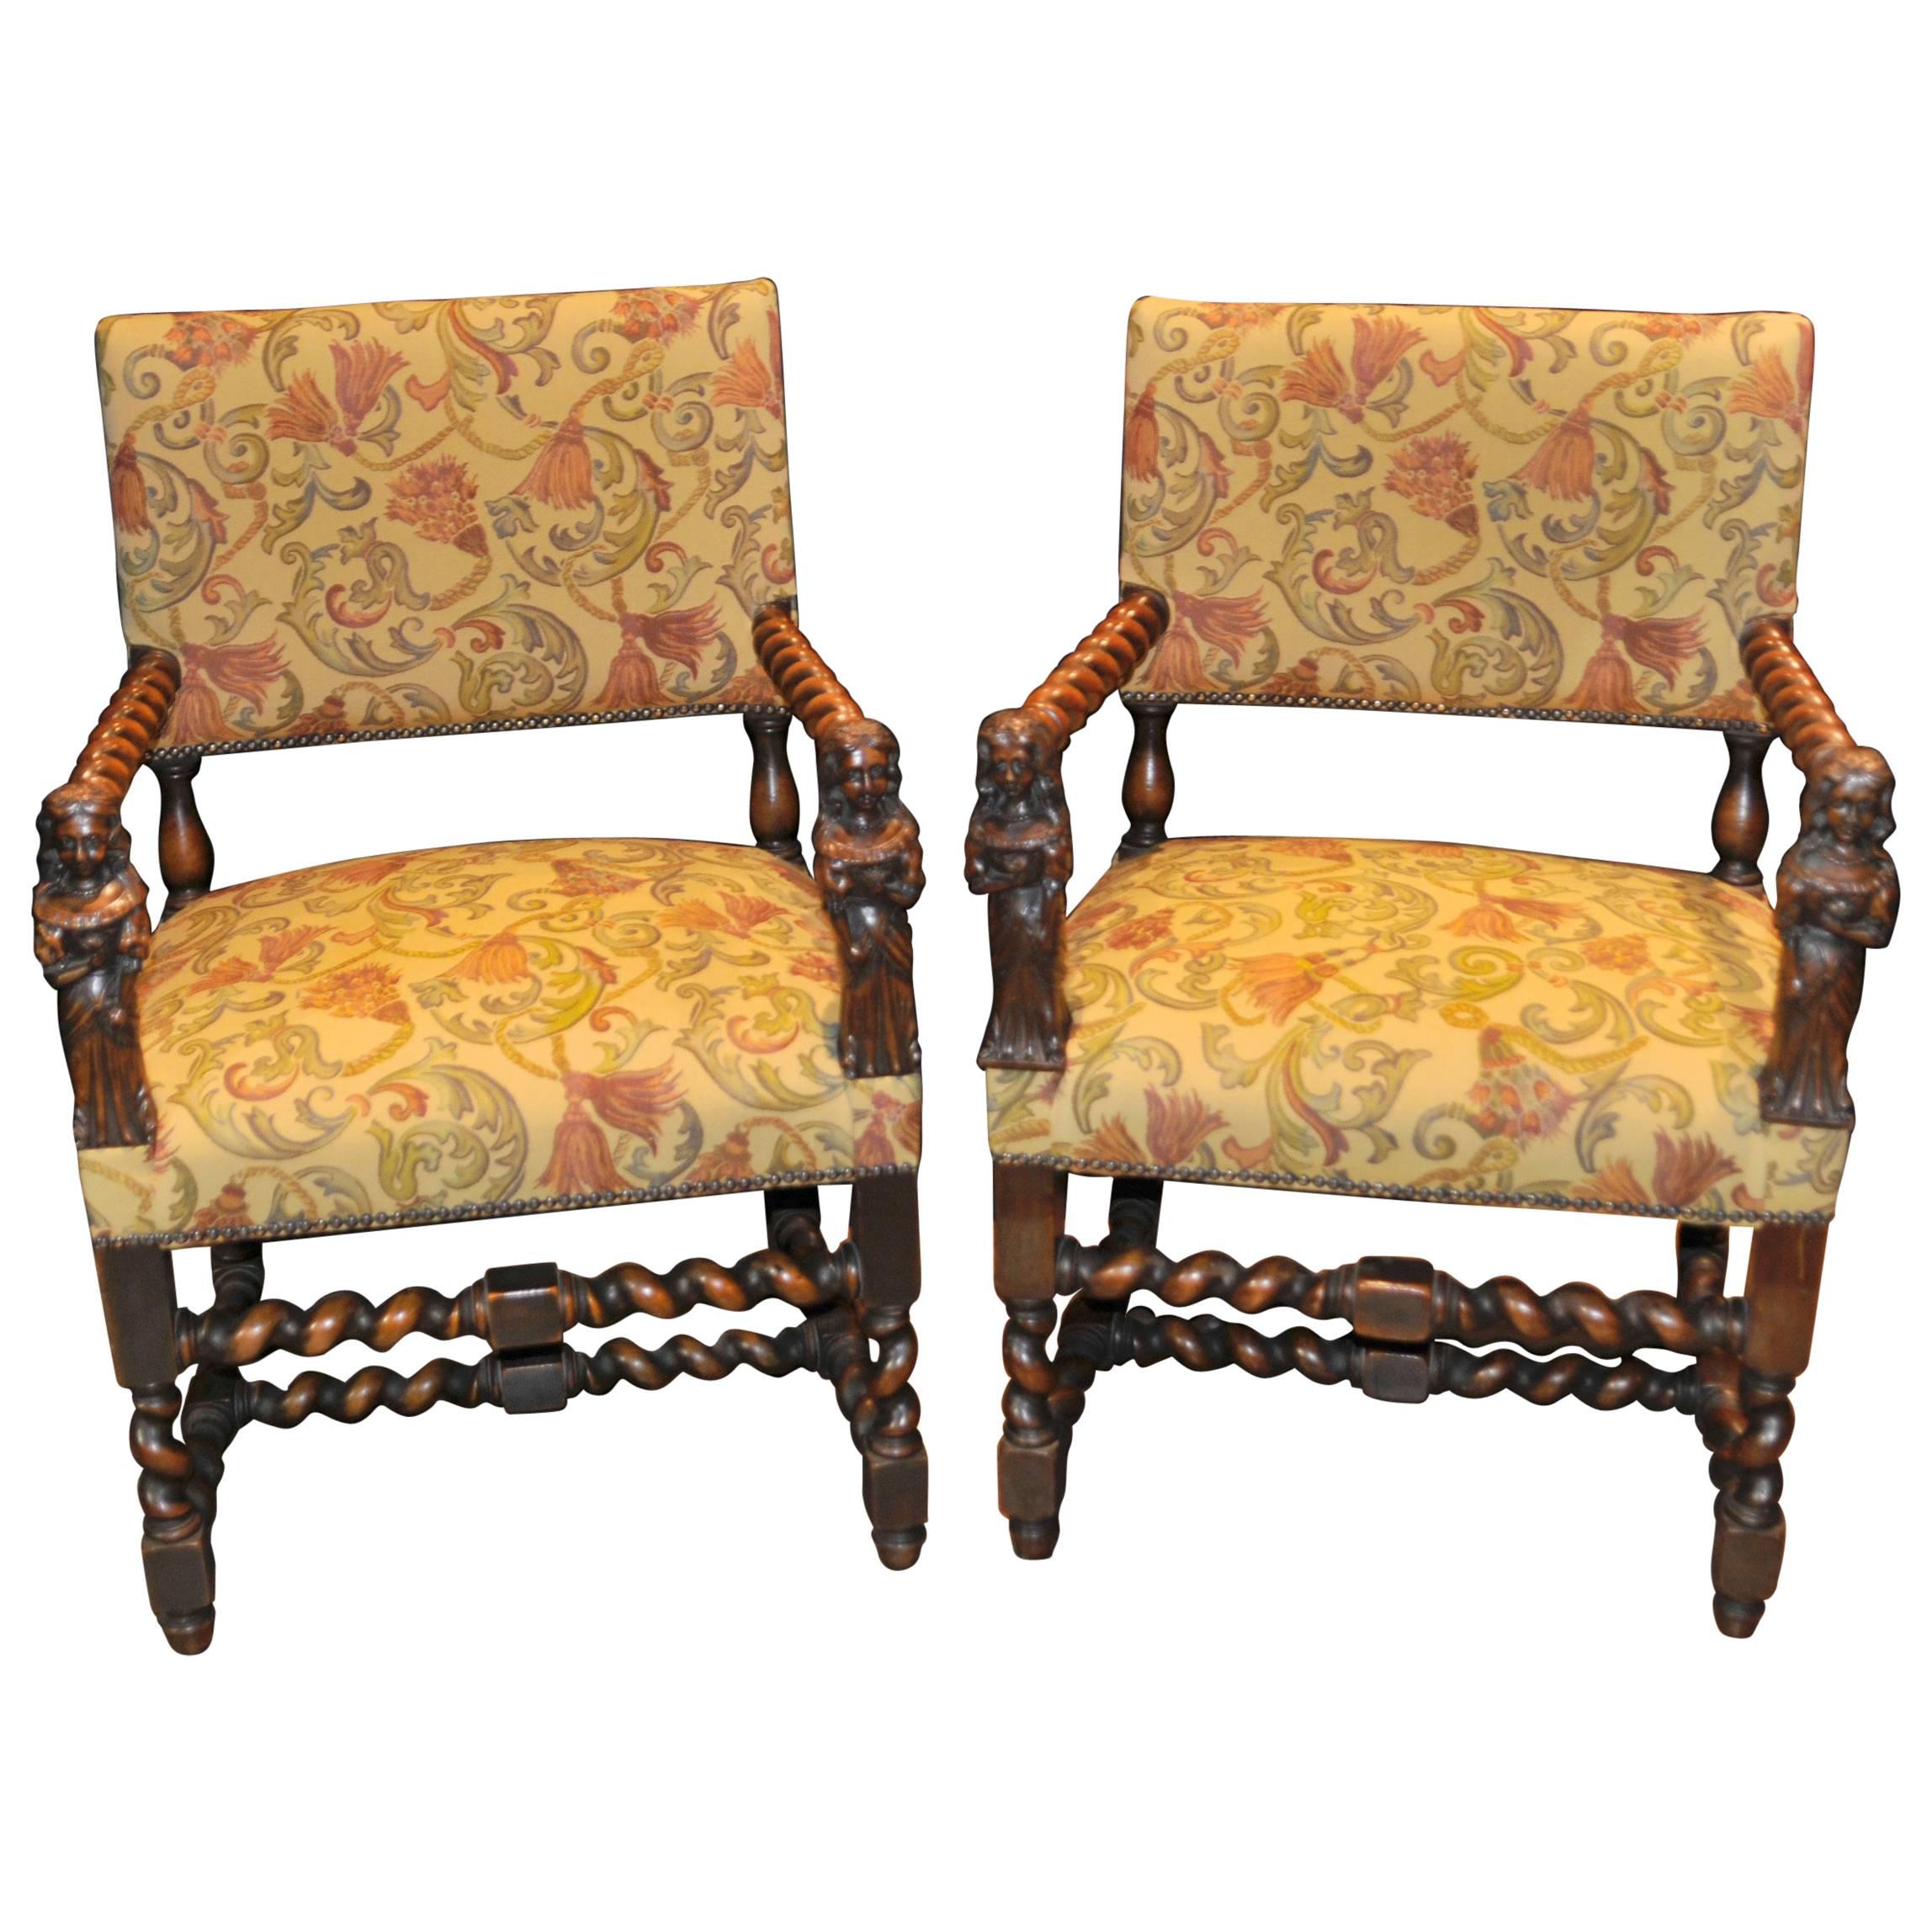 Antique Walnut Hand-Carved Italian Armchairs Barley Twist, 1860 For Sale